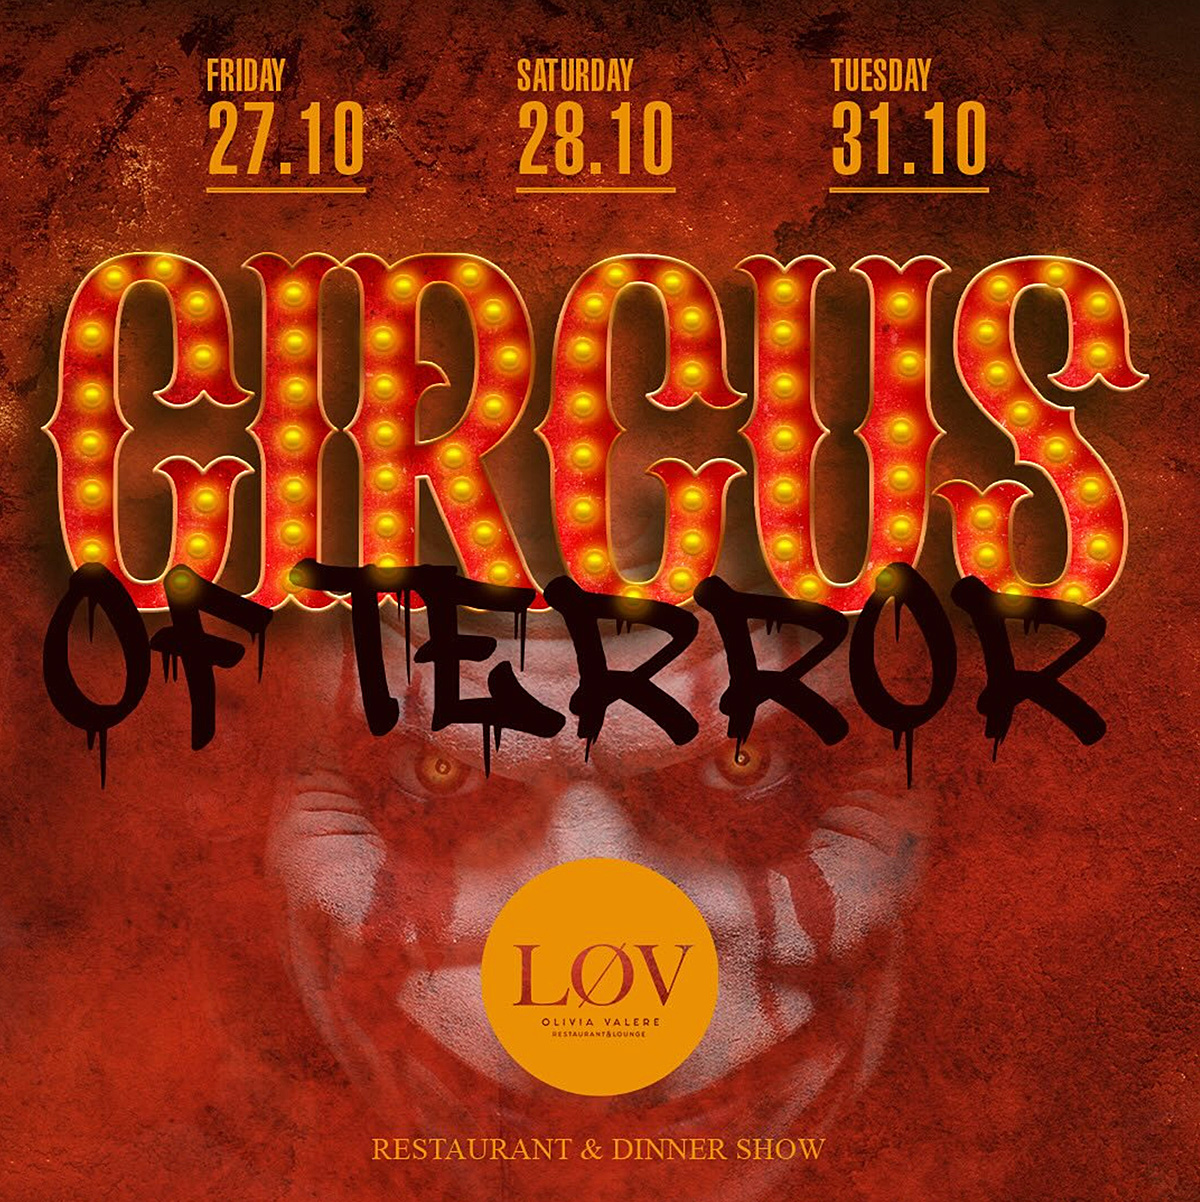 Circus of Terror at LOV show poster